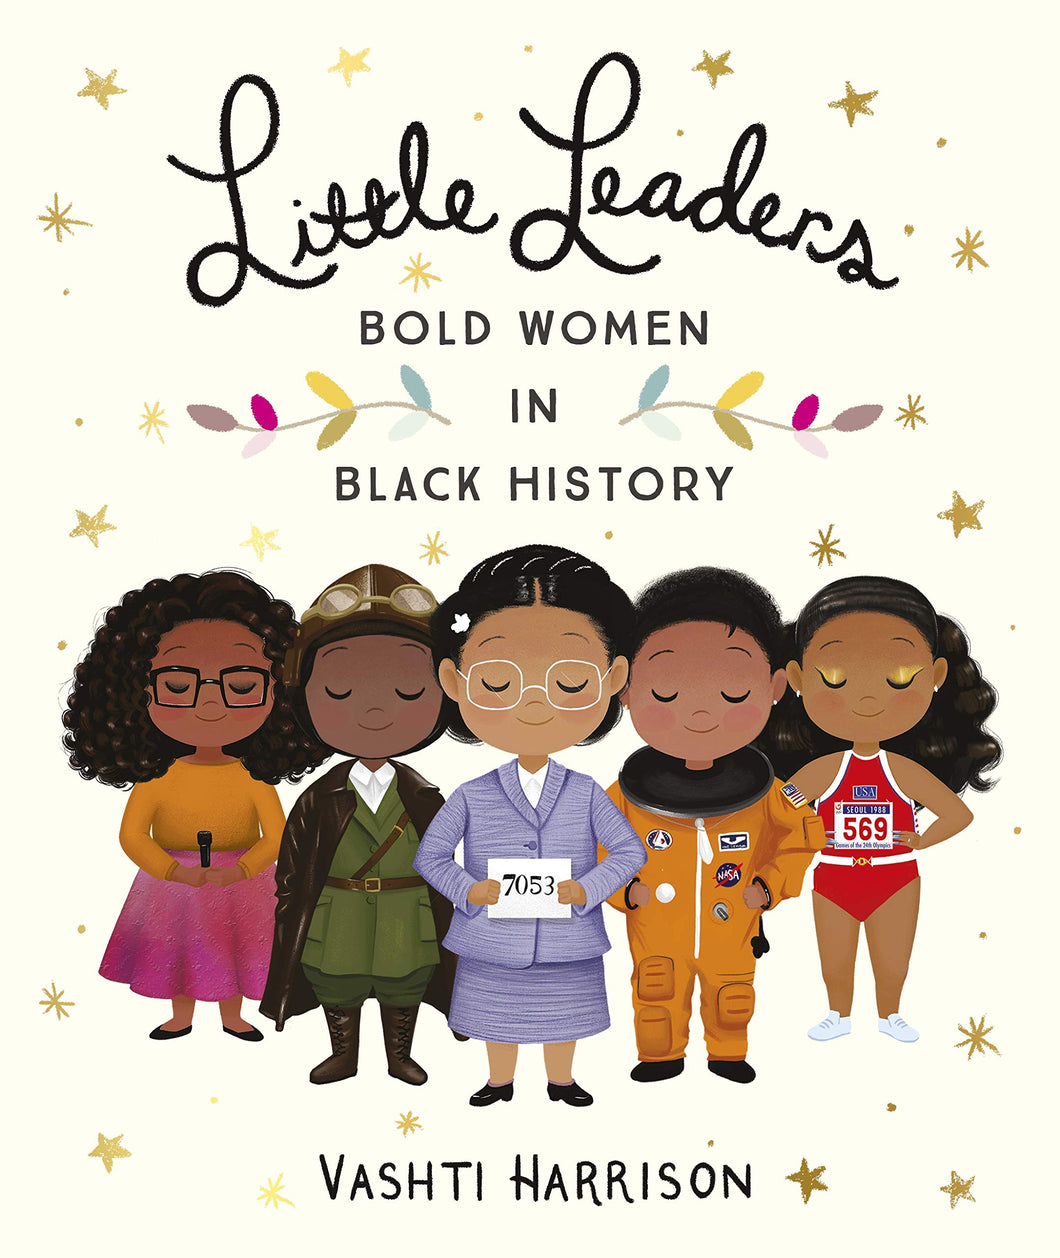 Off white cover shows colourful illustrations of 5 black women with their eyes closed. They are each wearing different outfits, including a suit, a leotard and a astronaut uniform. Cover reads 